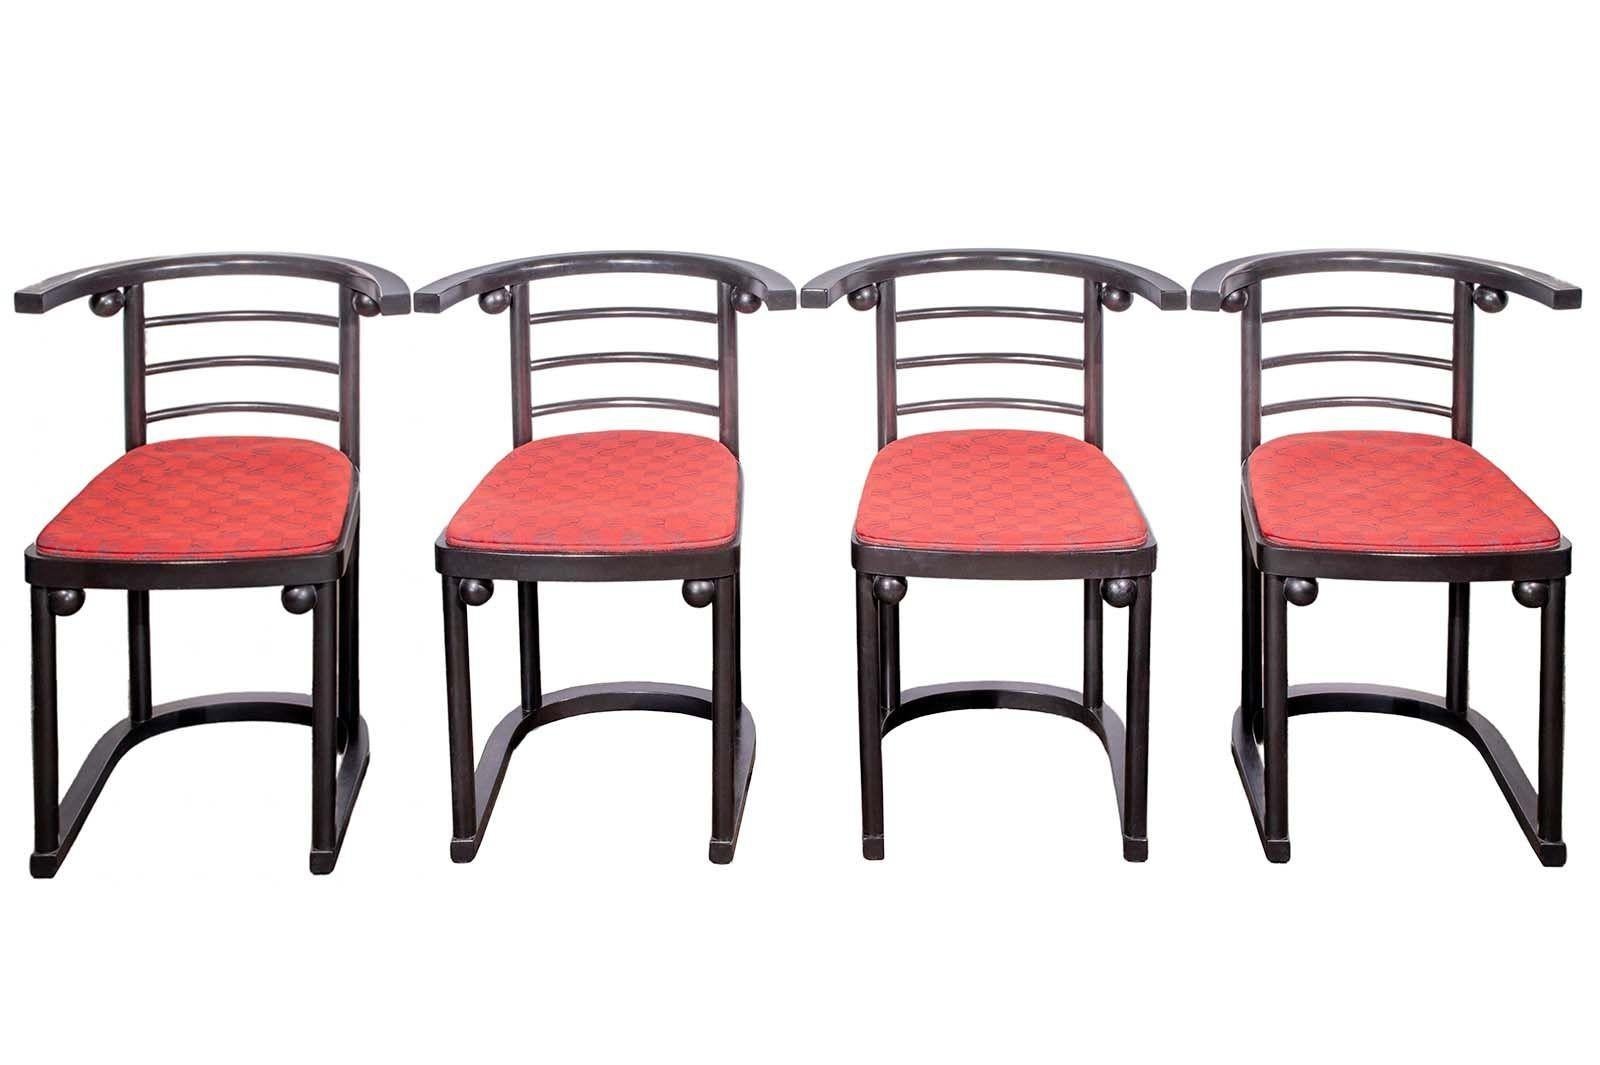 This vintage set made in the 1990's showcases the innovative style of Josef Hoffman, a renowned architect and designer of the early 20th century. The set consists of stunning ebonized round coffee table and four red upholstered chairs. 
The chairs'